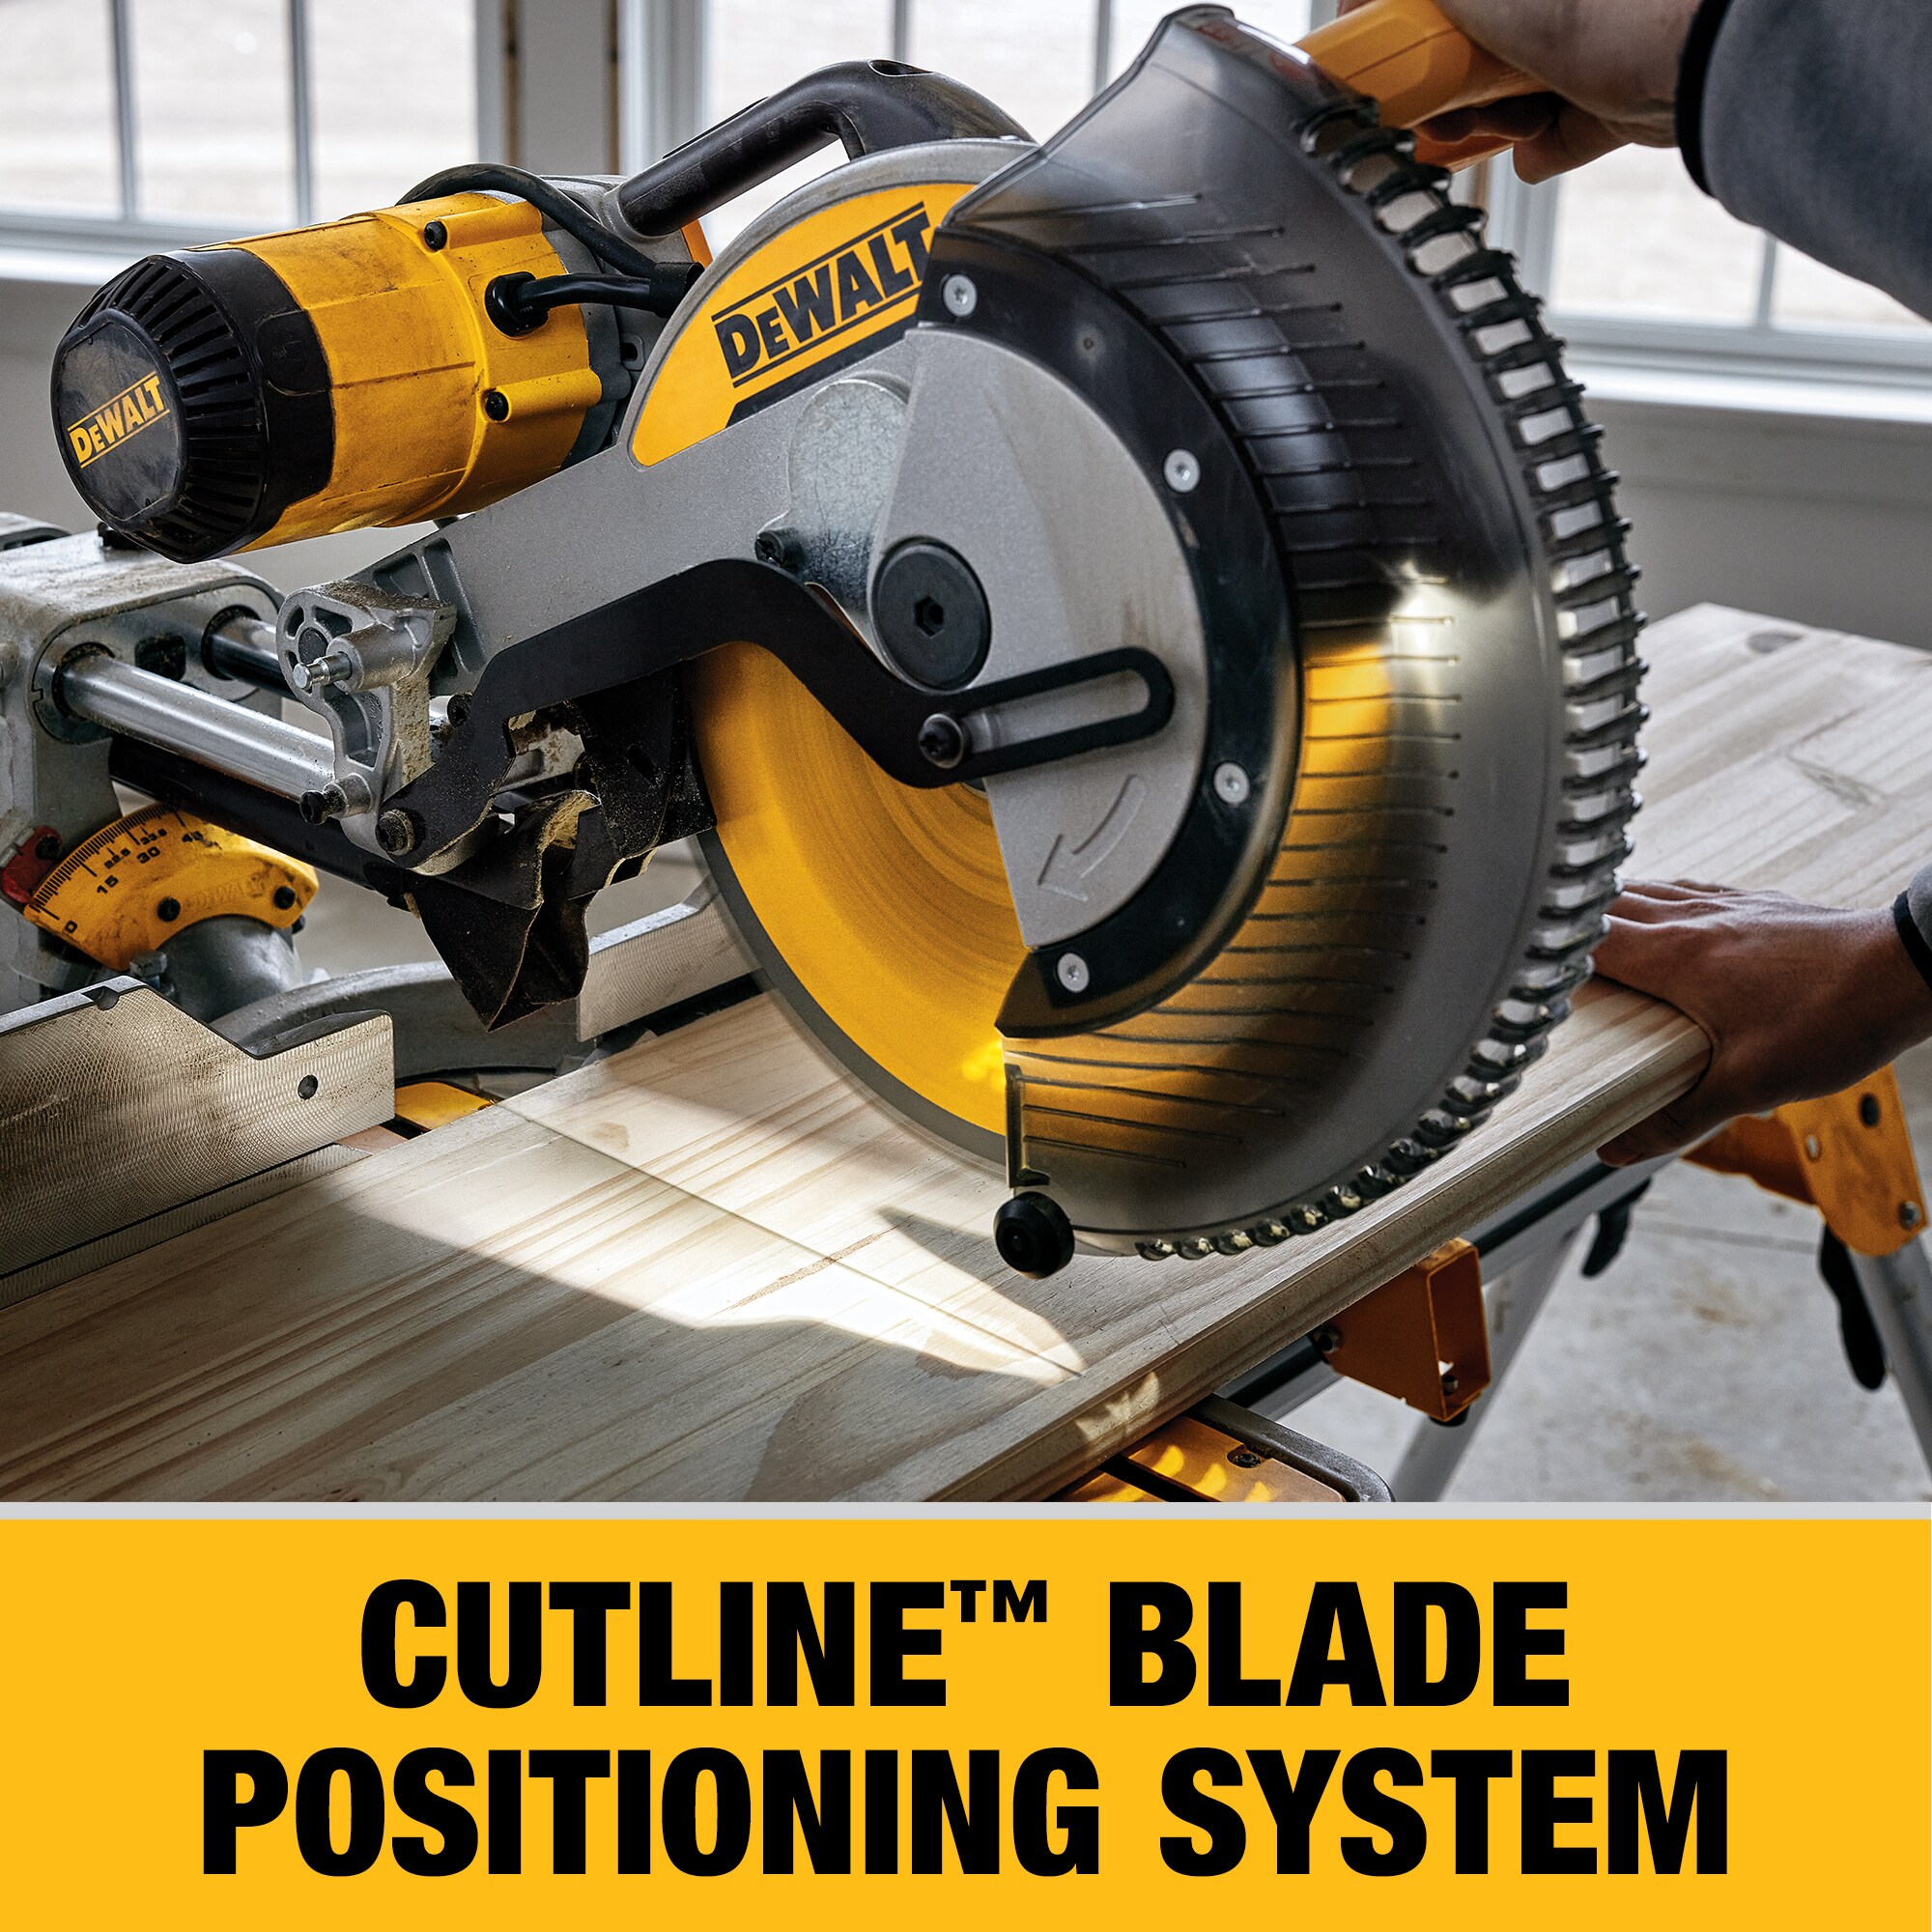 Dual Bevel Sliding Corded Miter Saw at Lowes.com